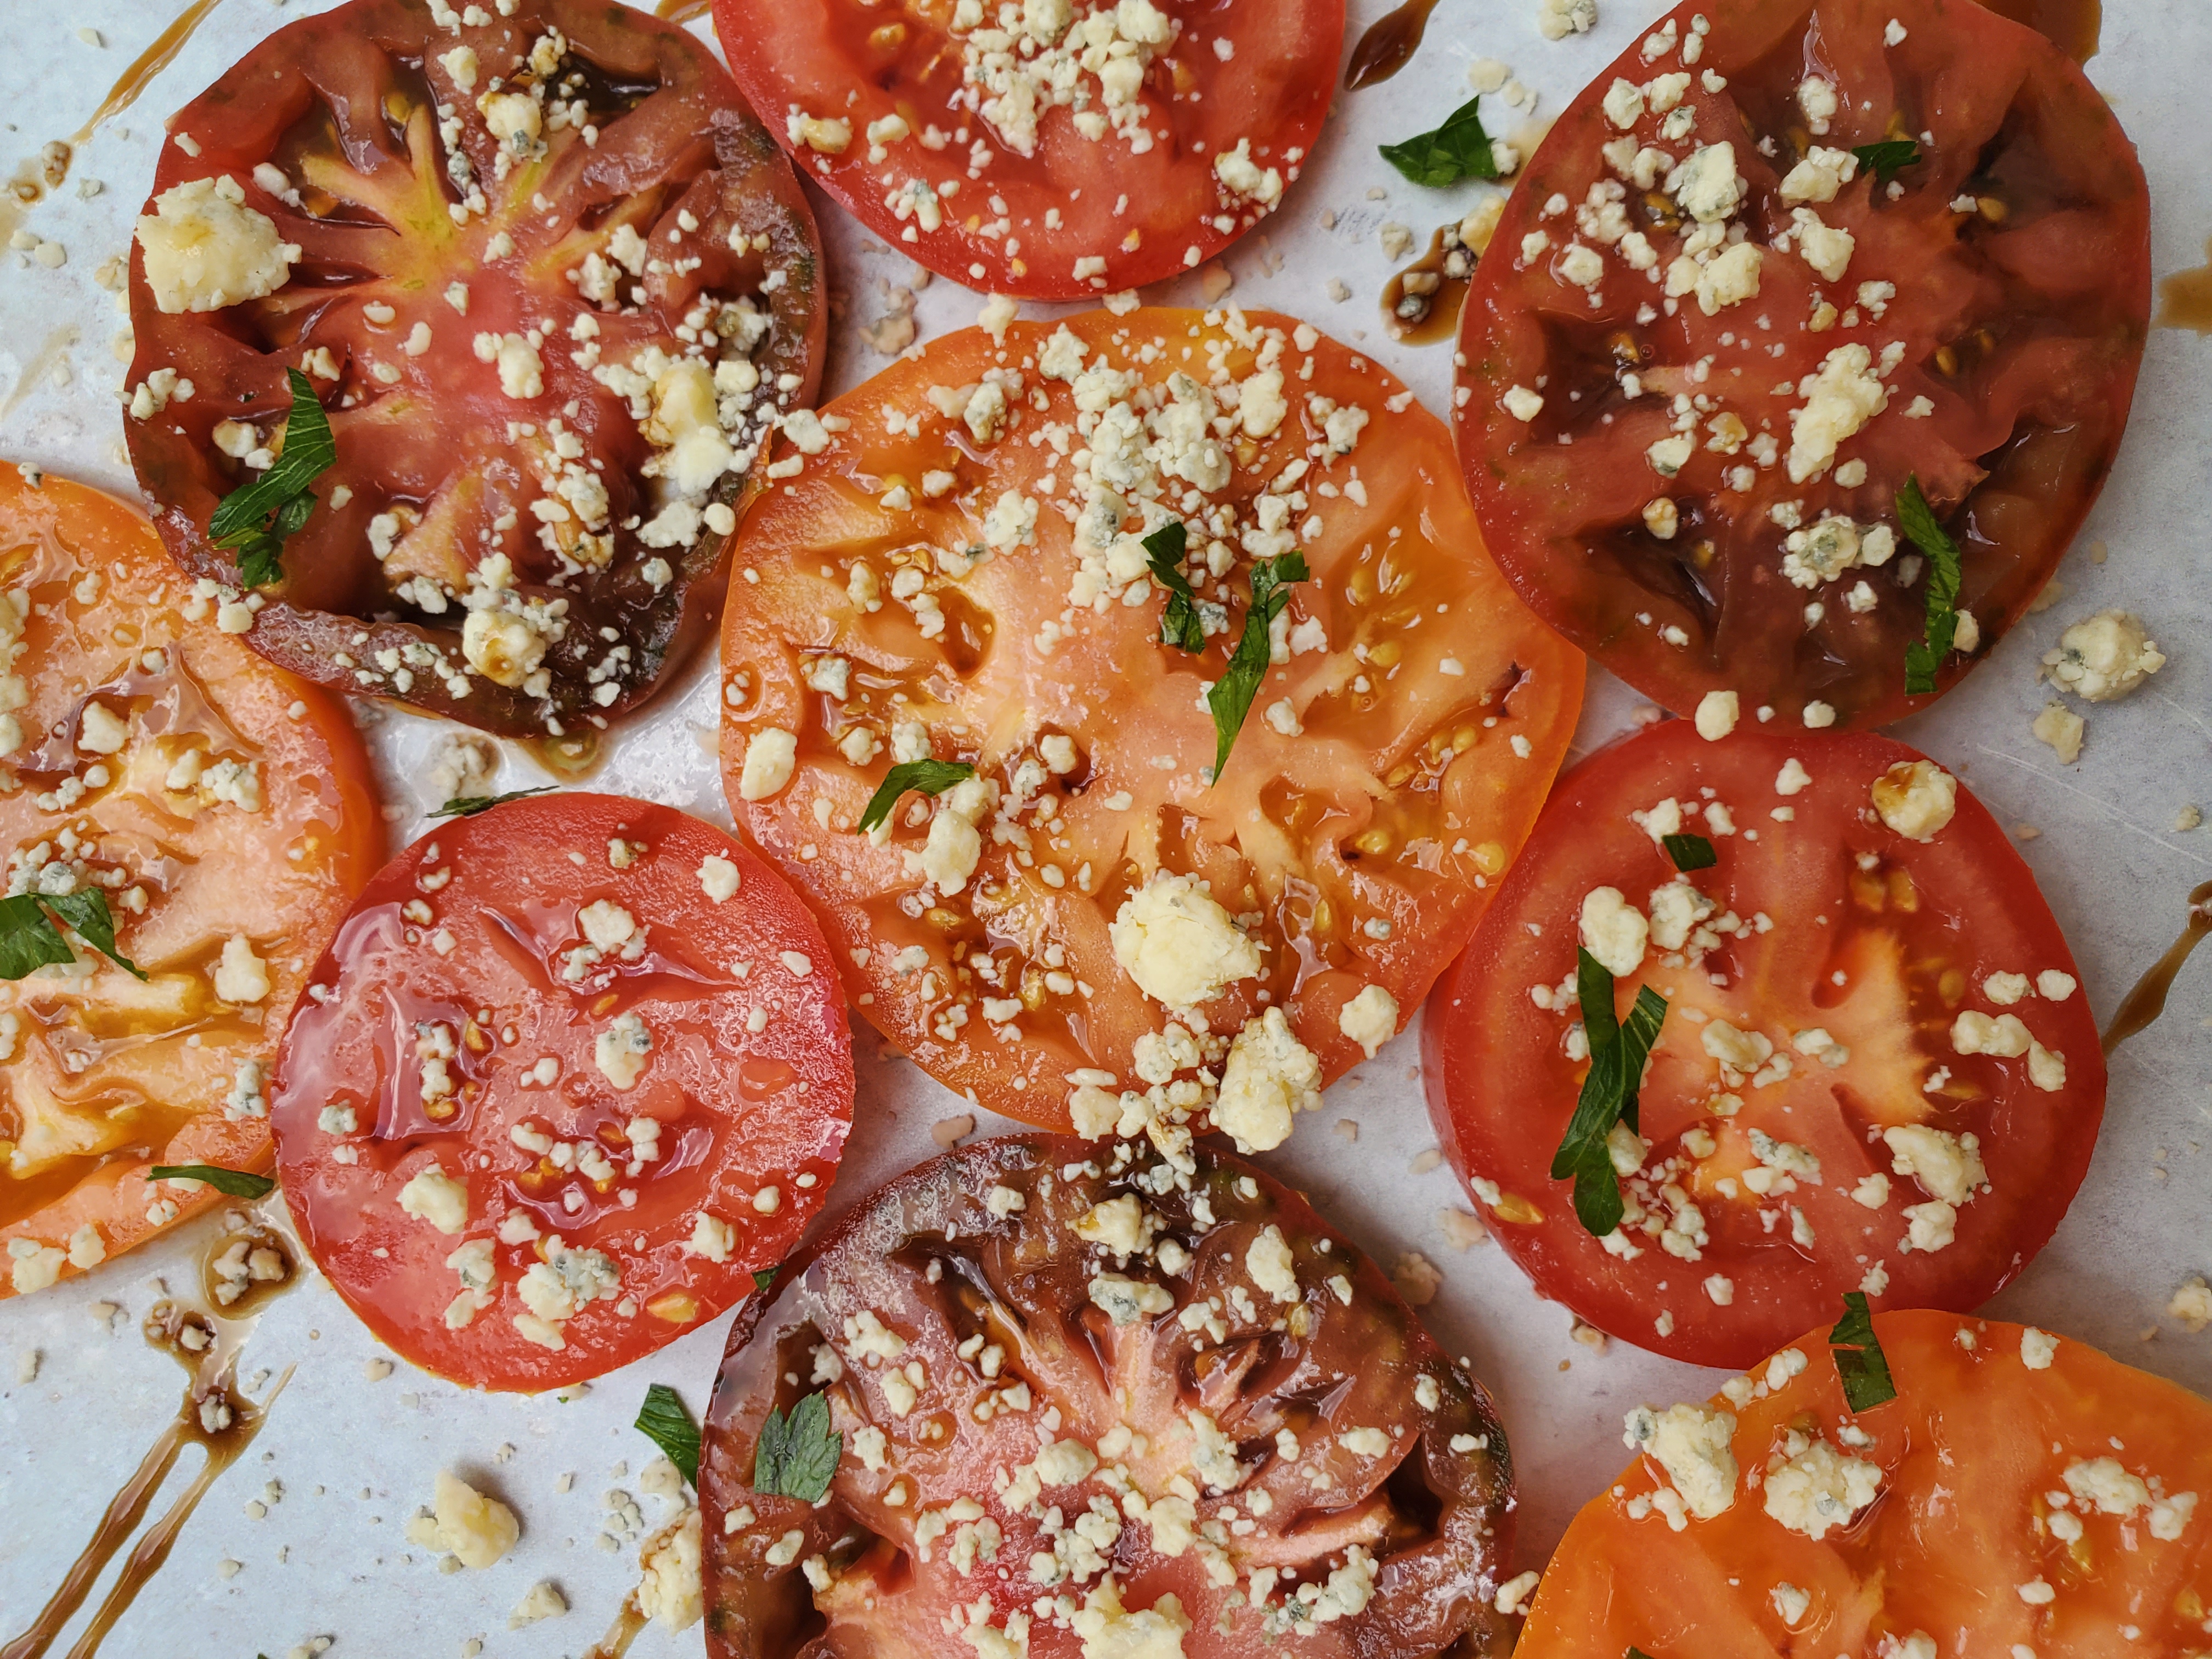 Up-close shot of heirloom tomatoes, topped with blue cheese and drizzled with balsamic glaze